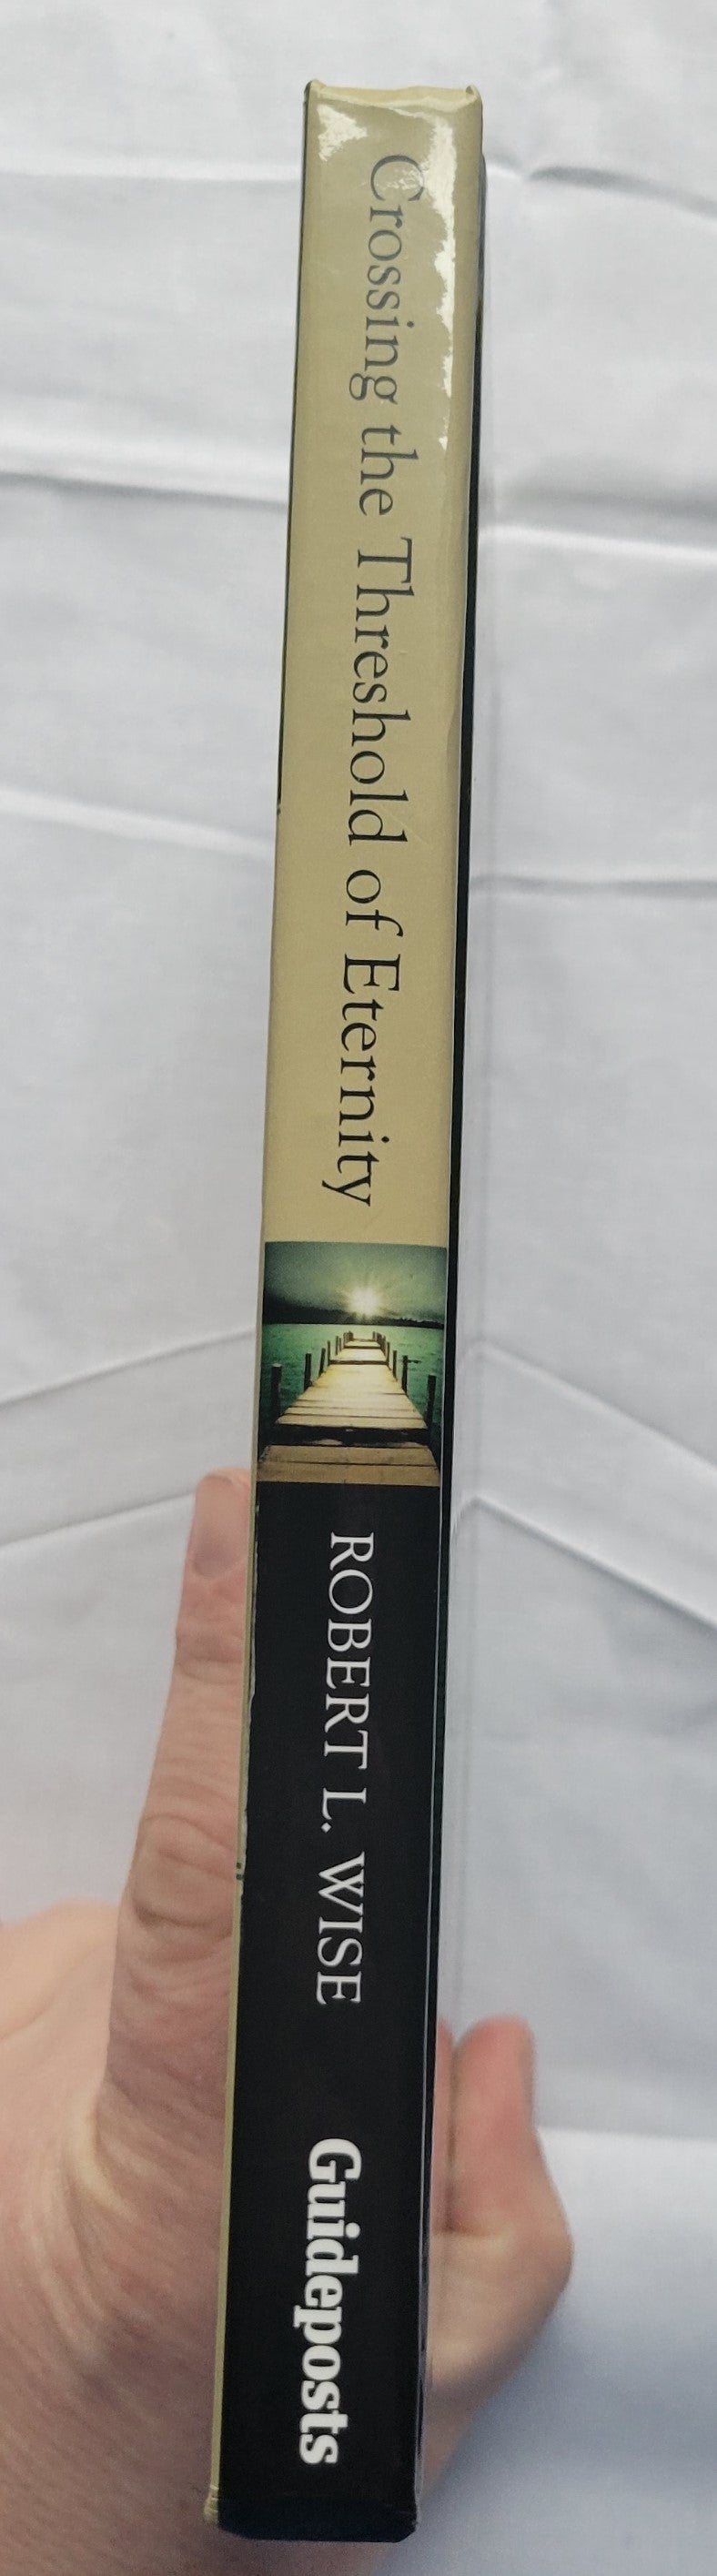 Used book "Crossing the Threshold of Eternity: What the Dying Can Teach the Living" by Dr. Robert L. Wise, published by Gospel Light, 2007. View of spine.